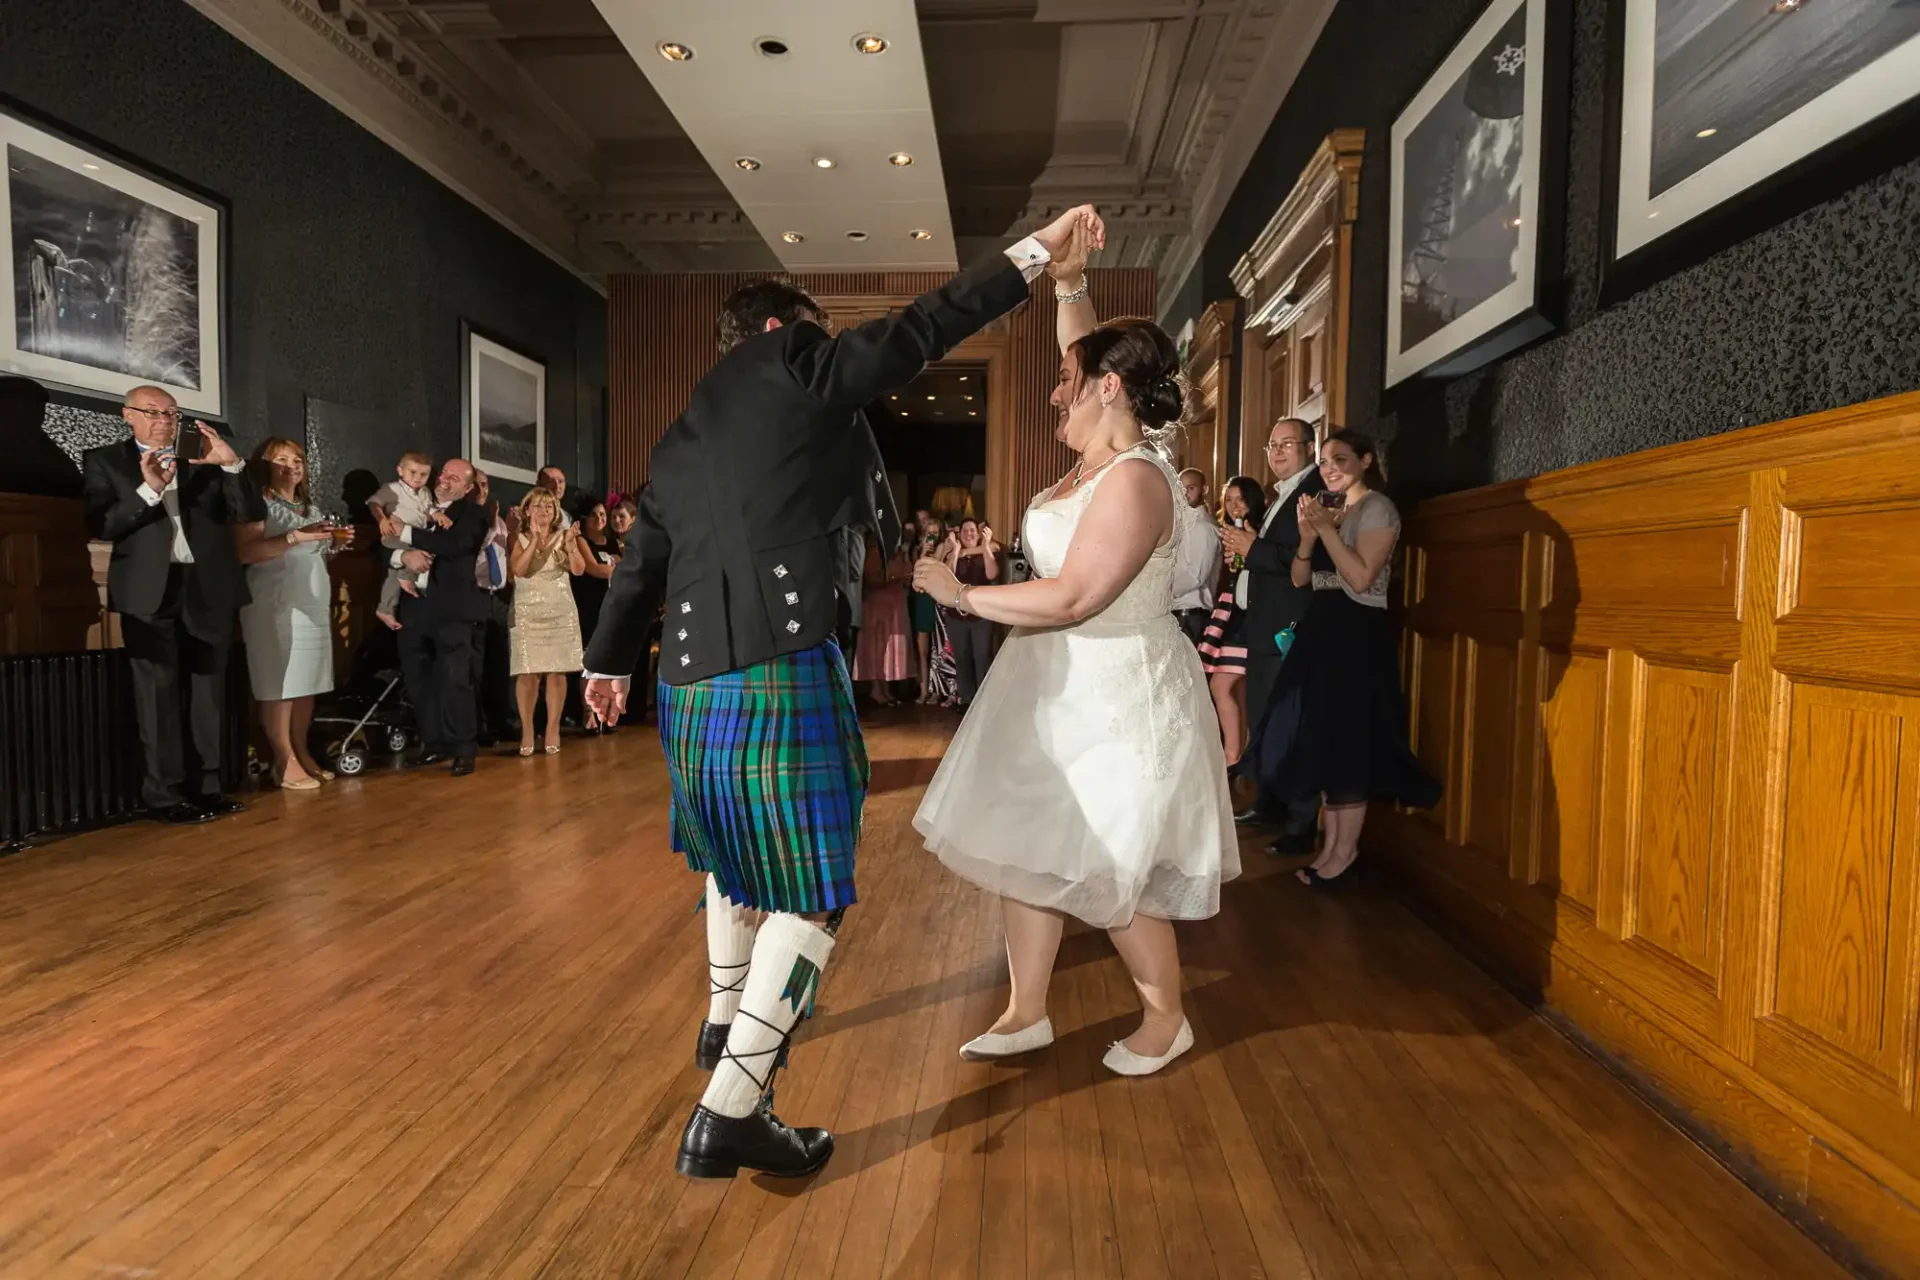 A bride and groom dancing joyously, the groom in a kilt, surrounded by applauding guests in an elegant hall.